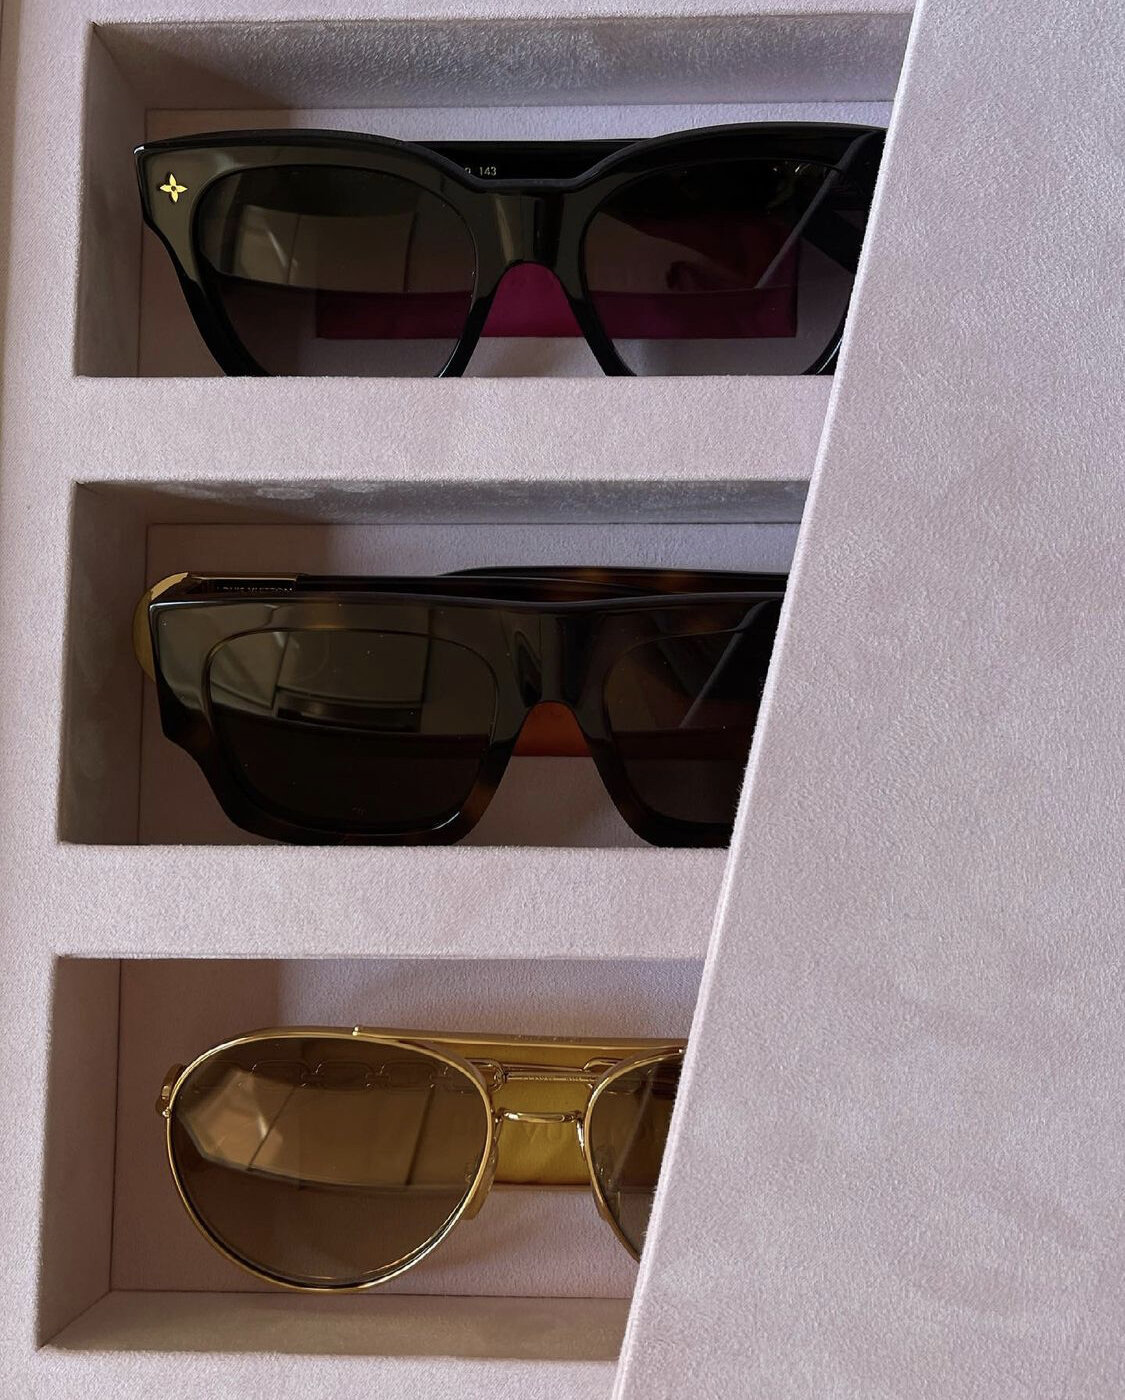 sunglasses2022 #louisvuitton #lv Sunglasses for 2022 and a Louis